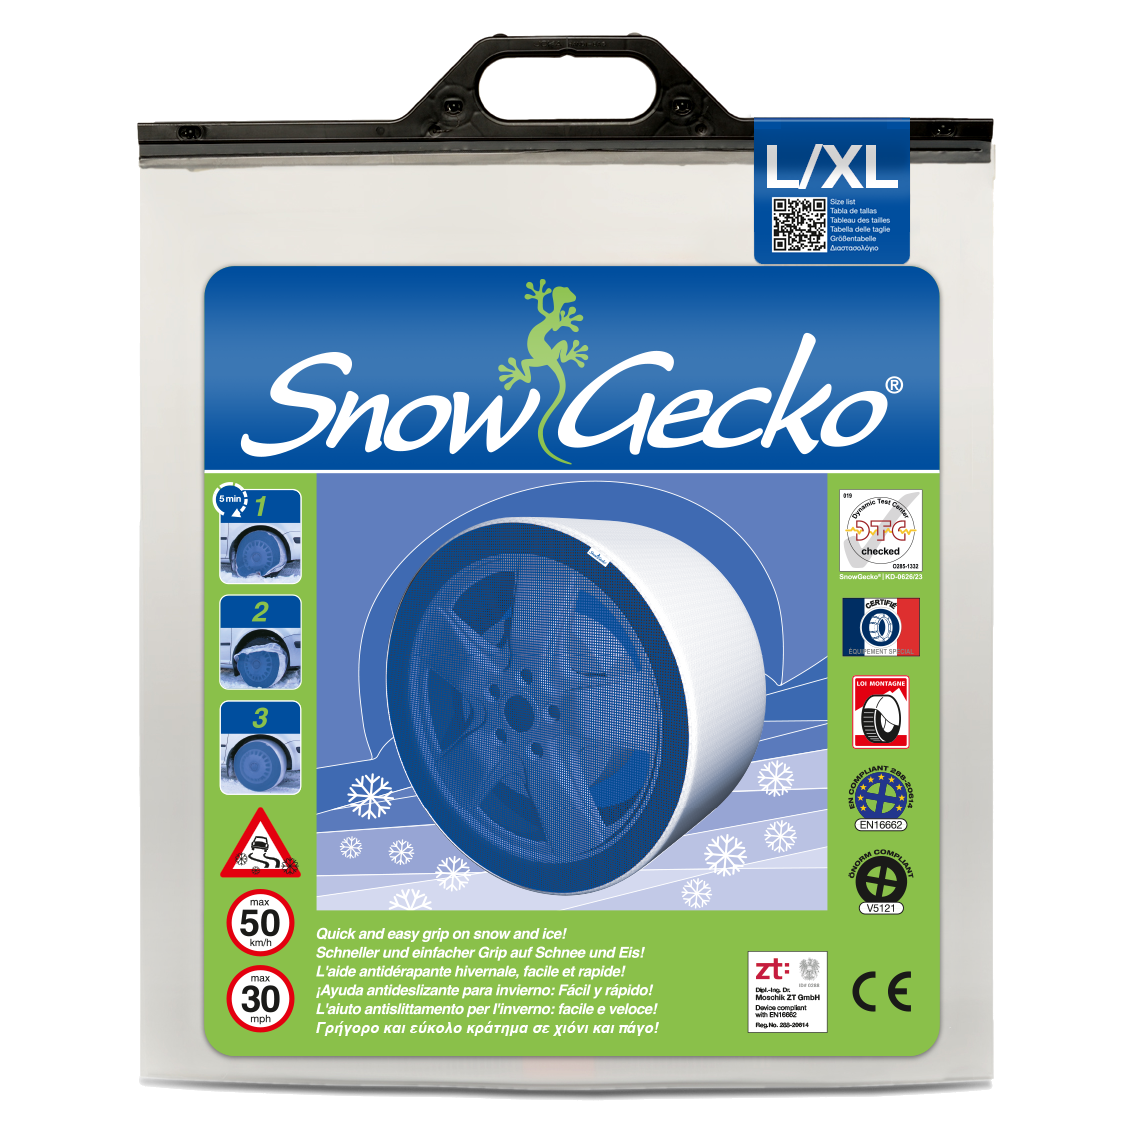 SnowGecko L/XL product packaging front side